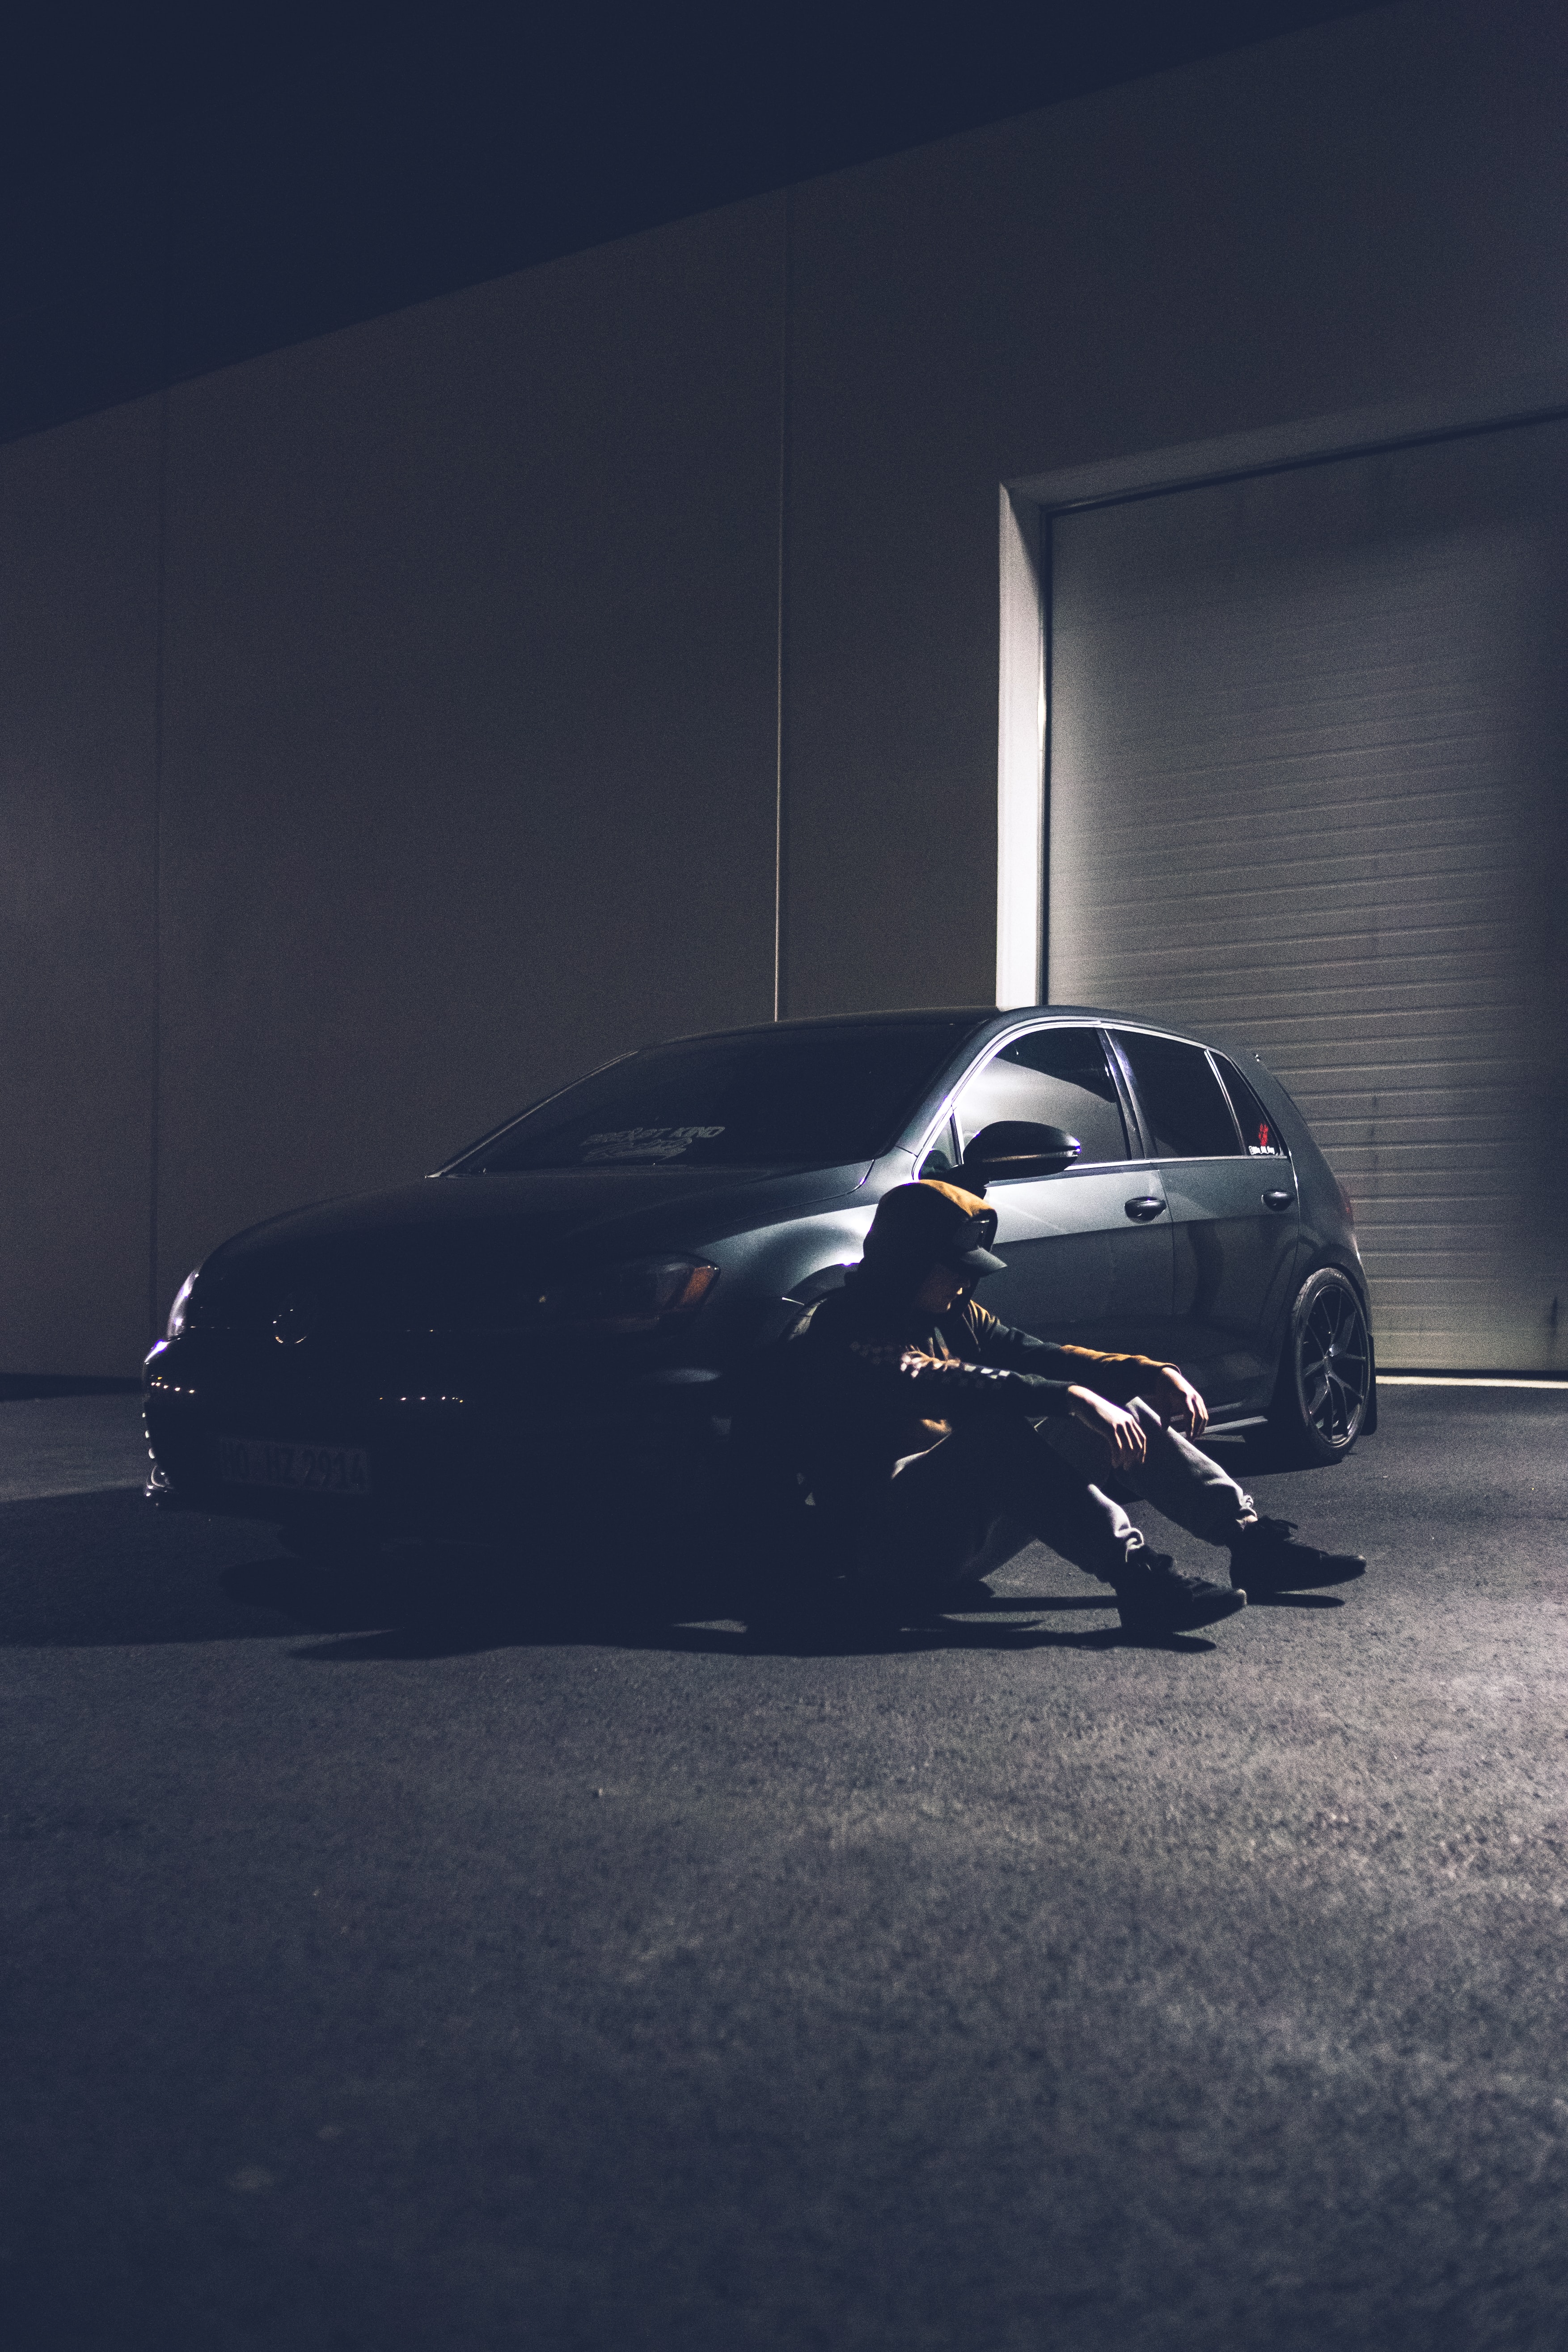 loneliness, sadness, cars, car, machine, cap, alone, lonely, sorrow Aesthetic wallpaper